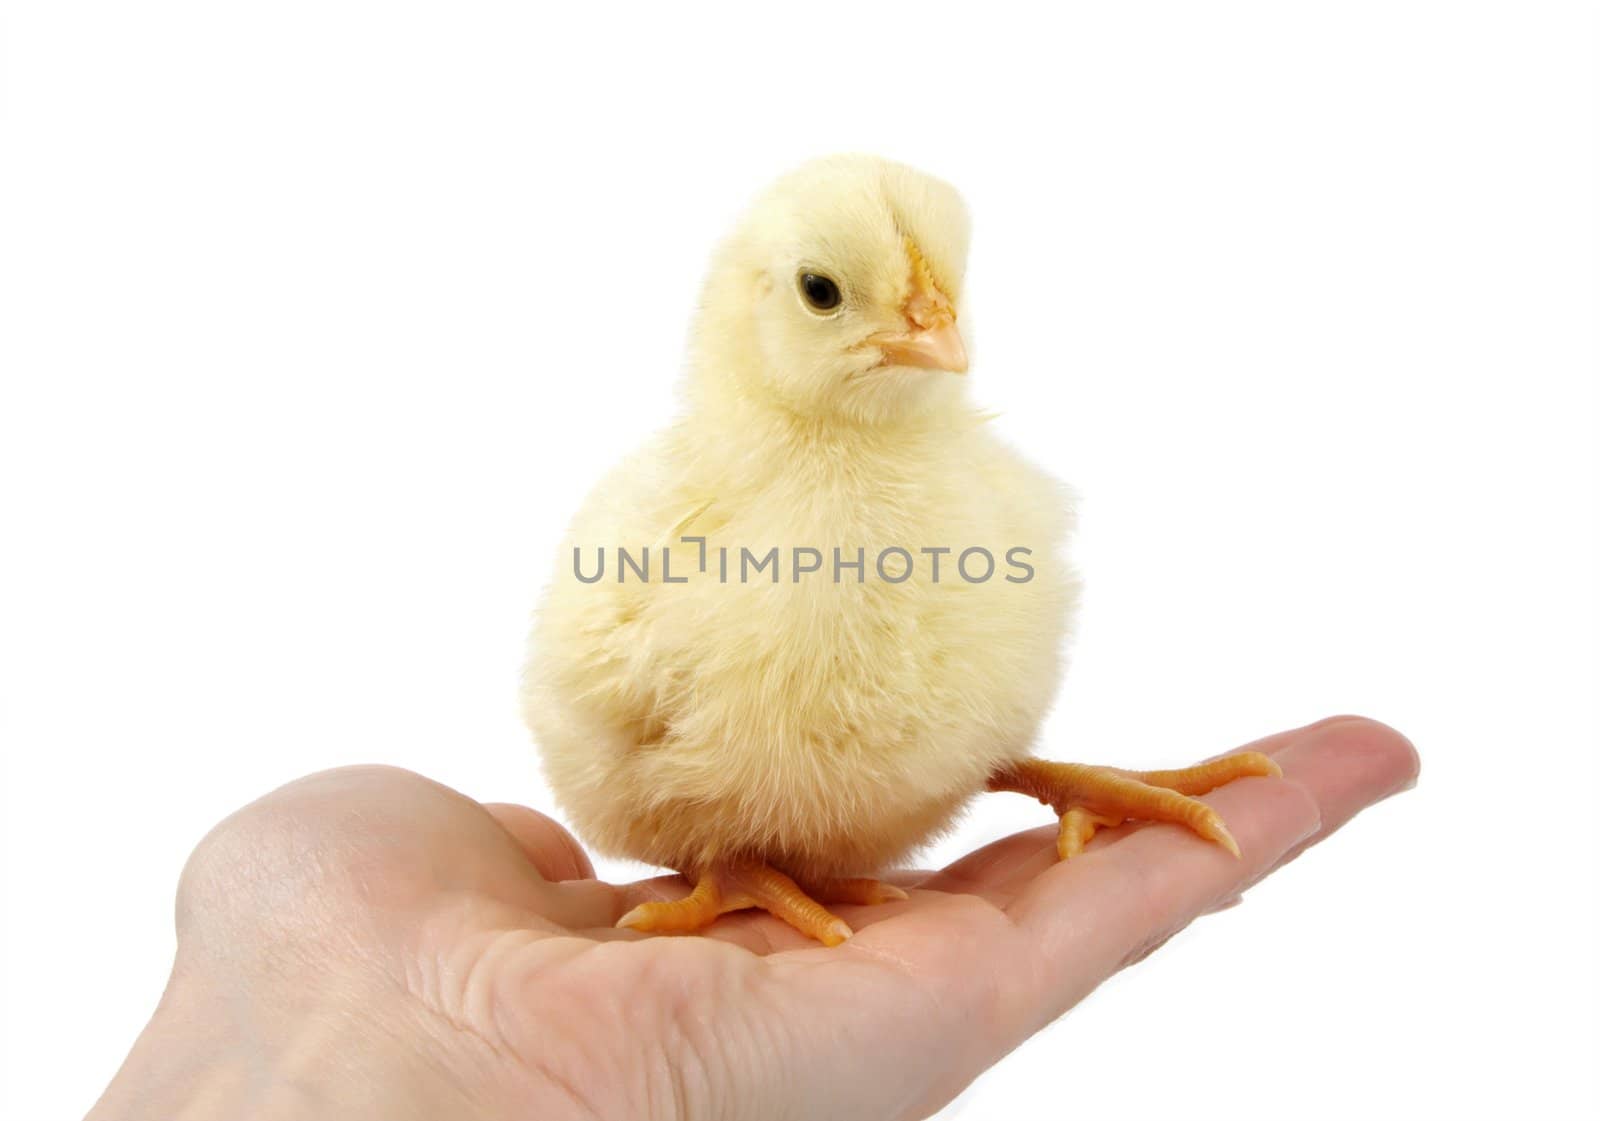 hand holding a chick, isolated on white